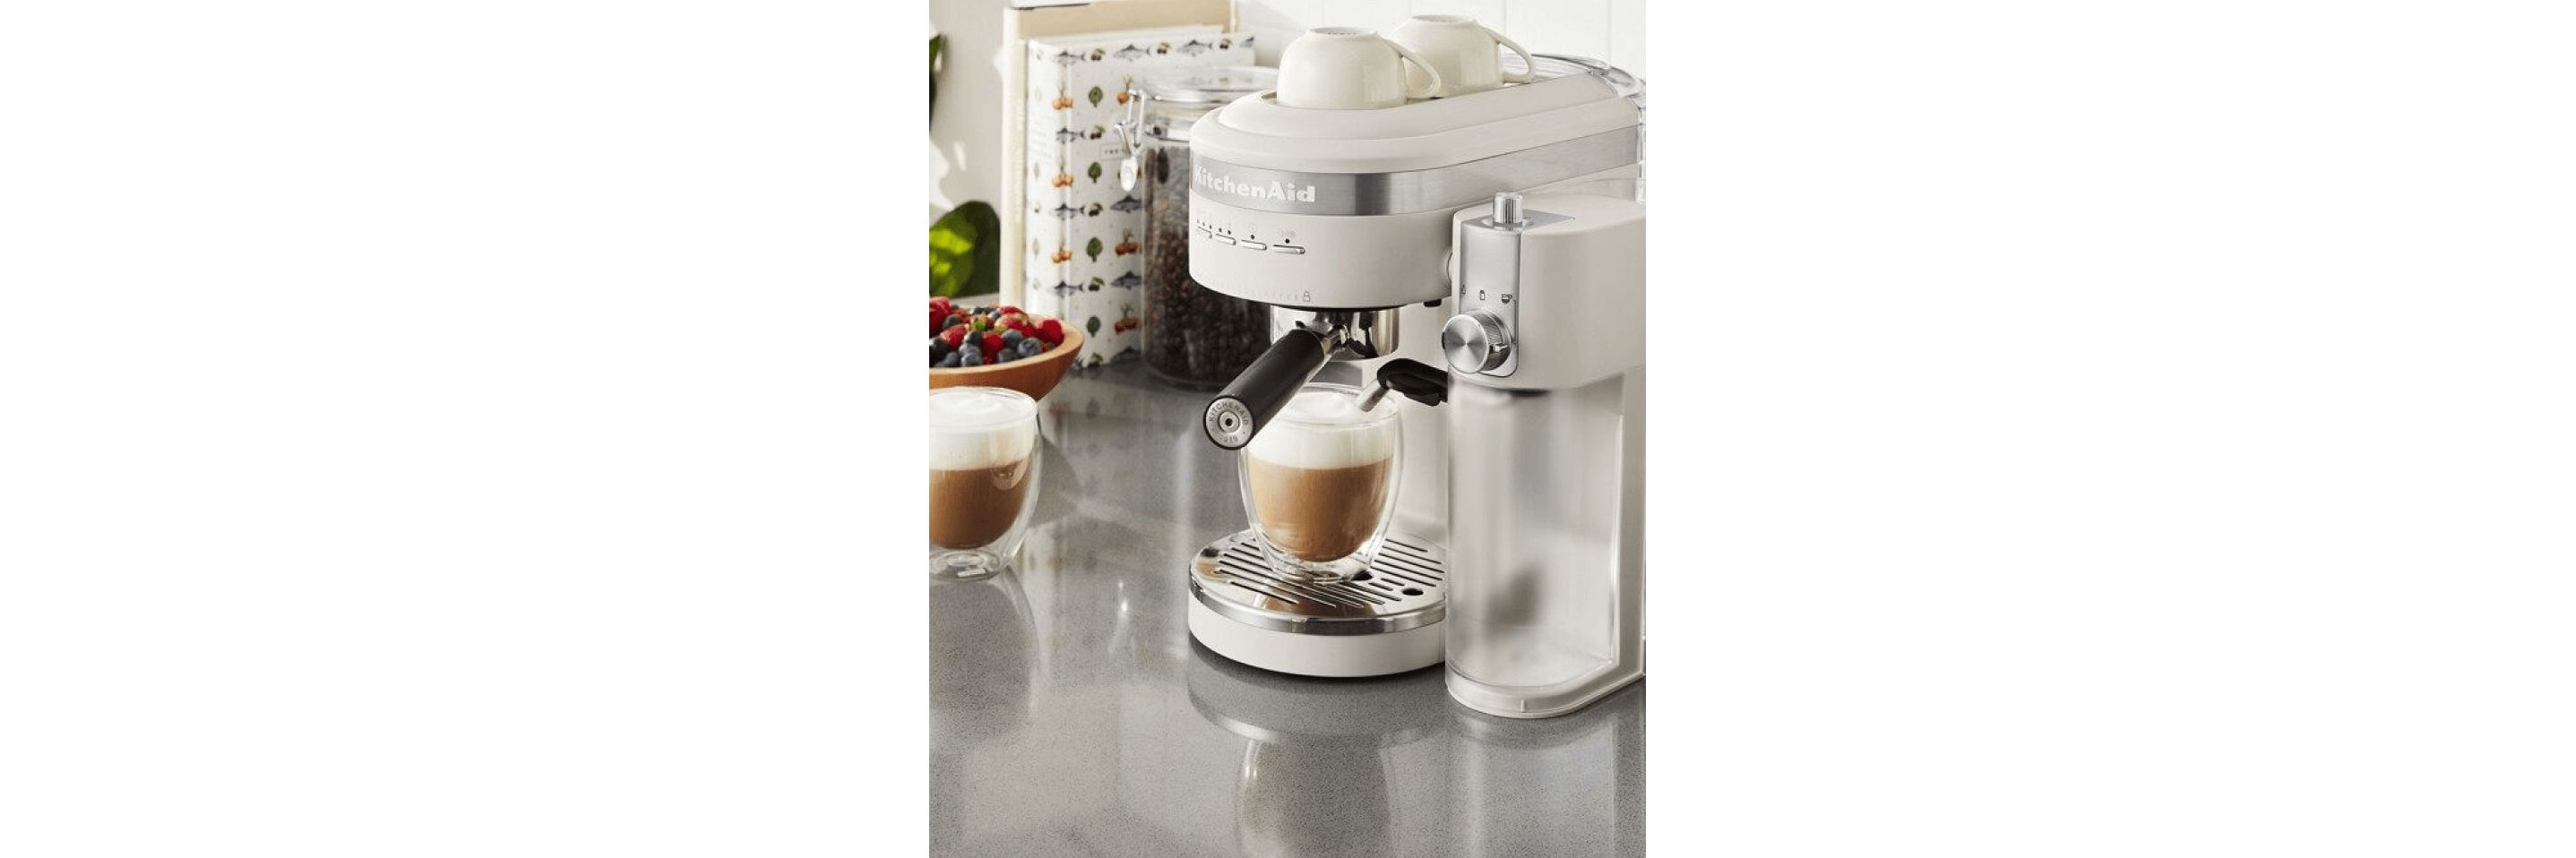 Kitchen Appliances to Bring Life to | Inspiration Culinary KitchenAid